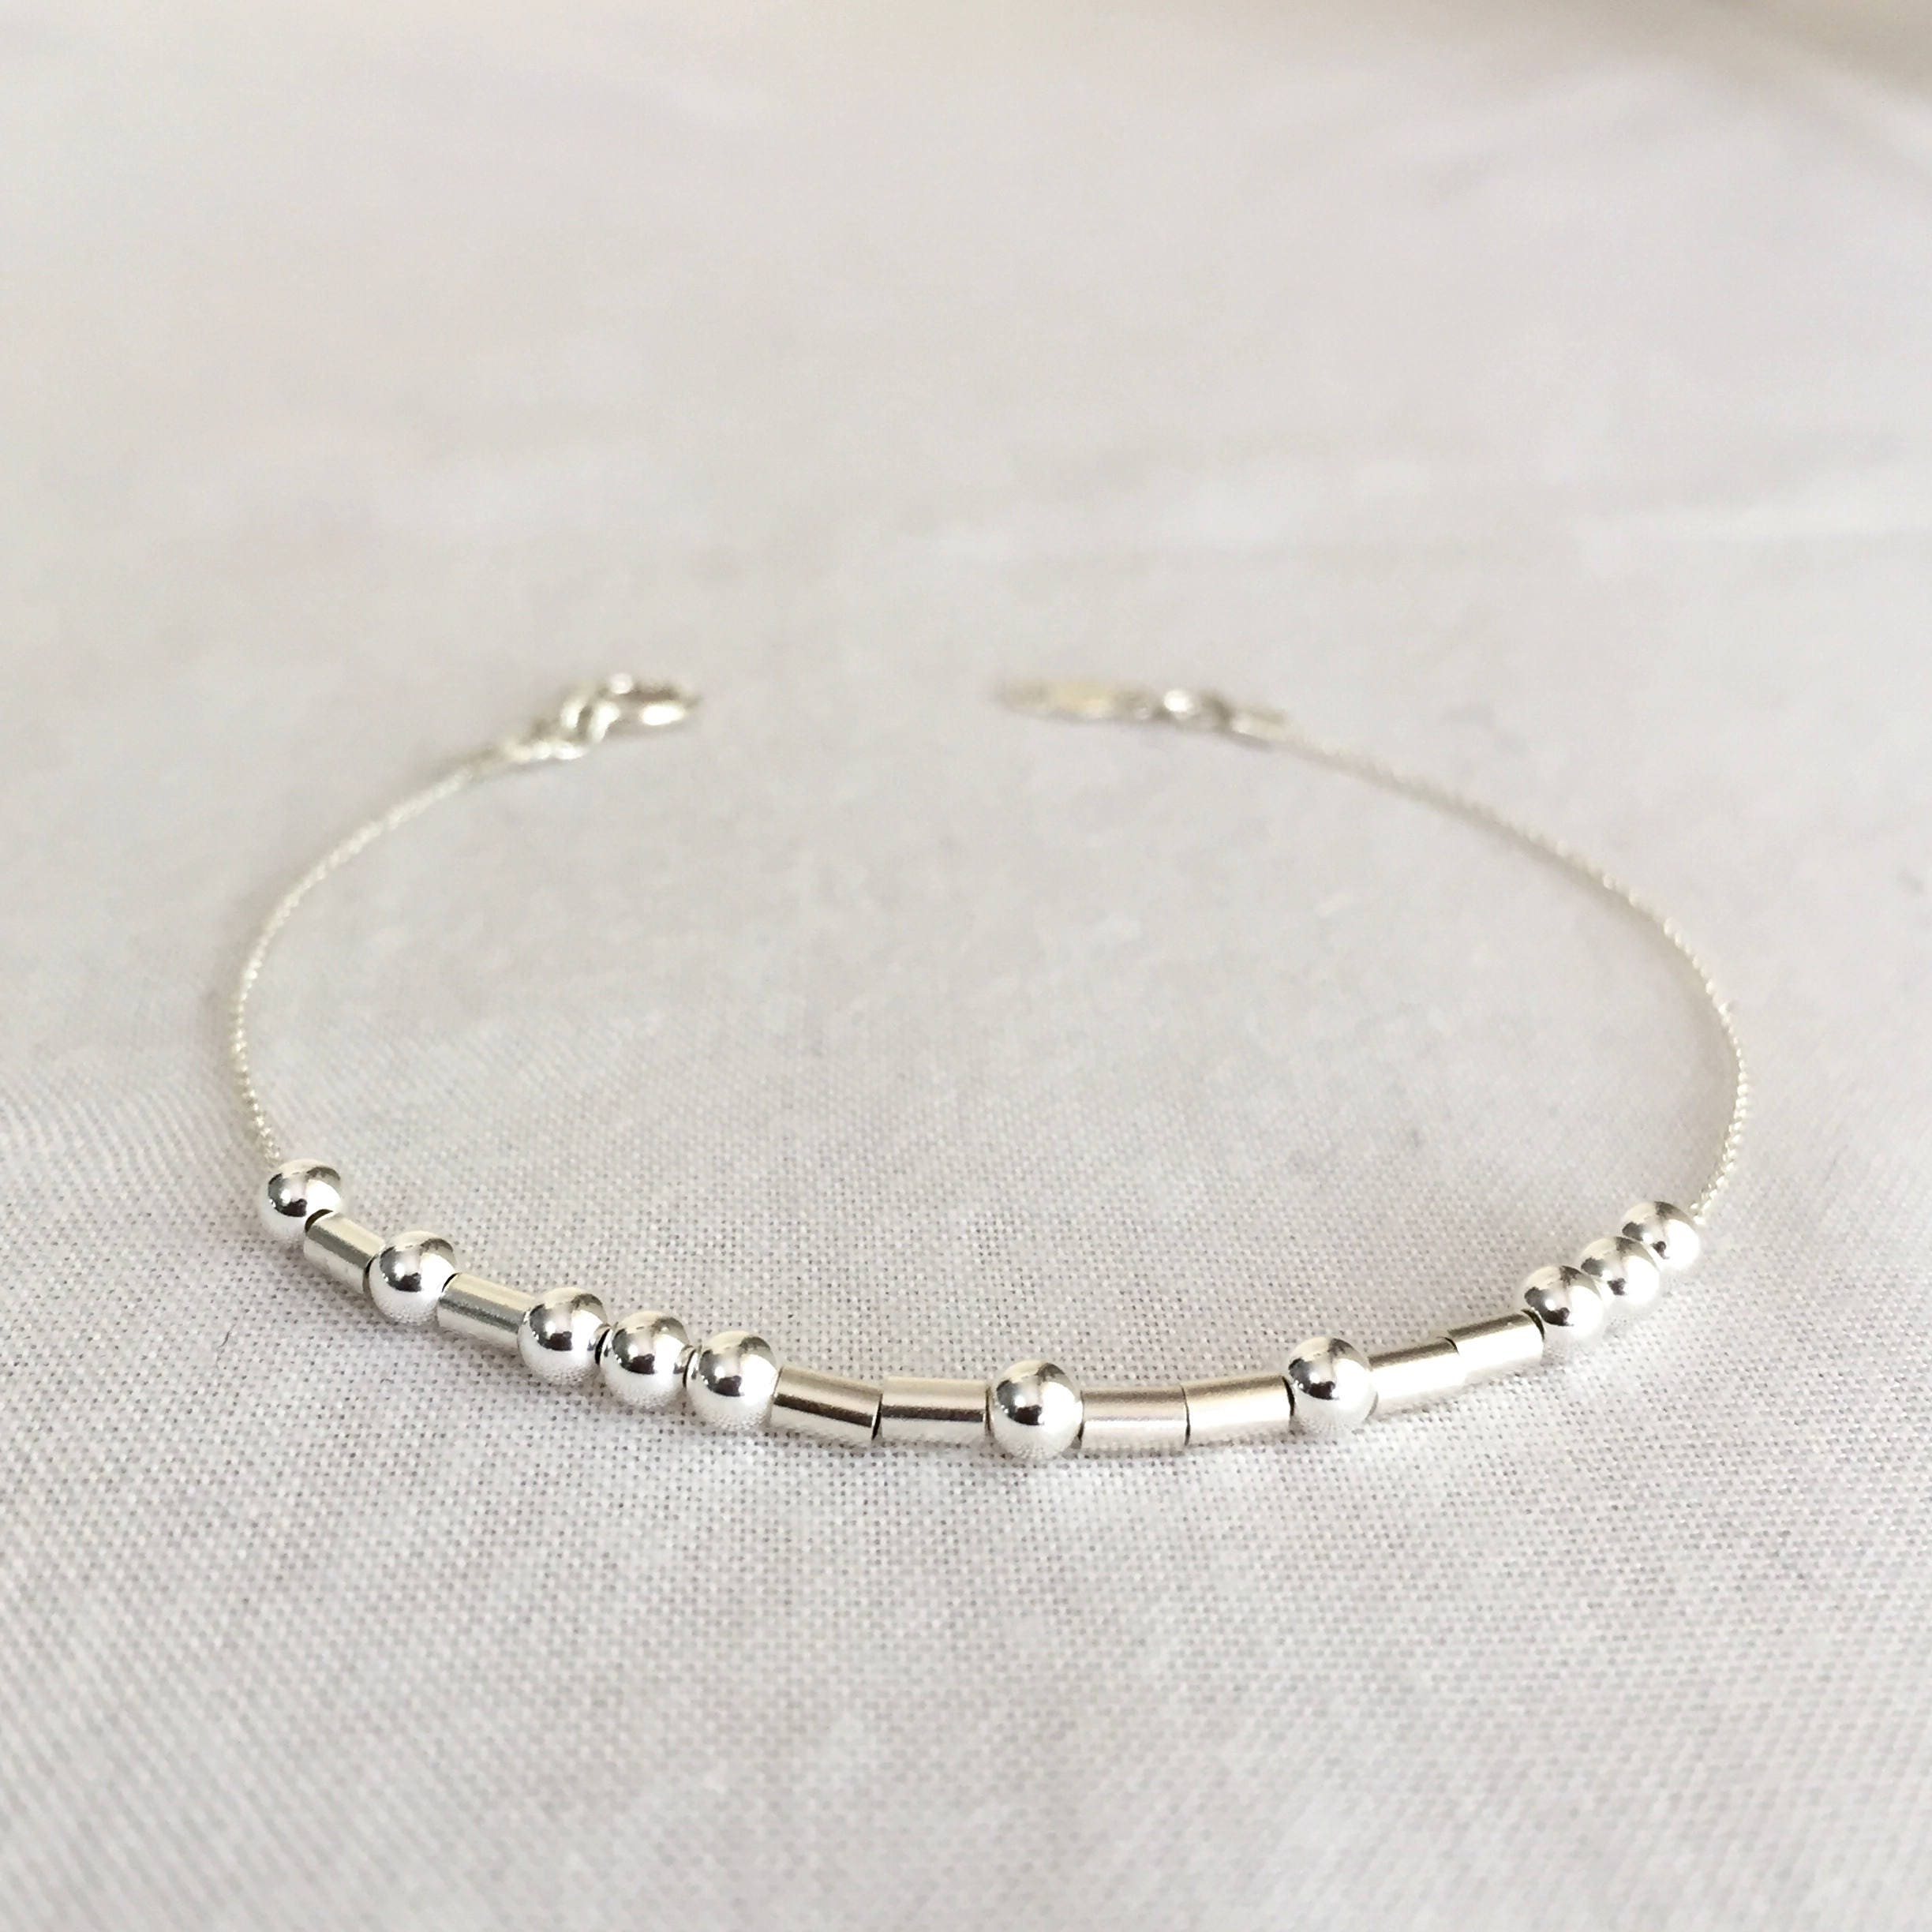 Sterling Silver Beads on Silk Morse Code Bracelets for Women Message Friendship Gifts Friendship Bracelets Gifts for Friends Gifts for Her M MOOHAM 925 Sterling Silver Morse Code Bracelet 